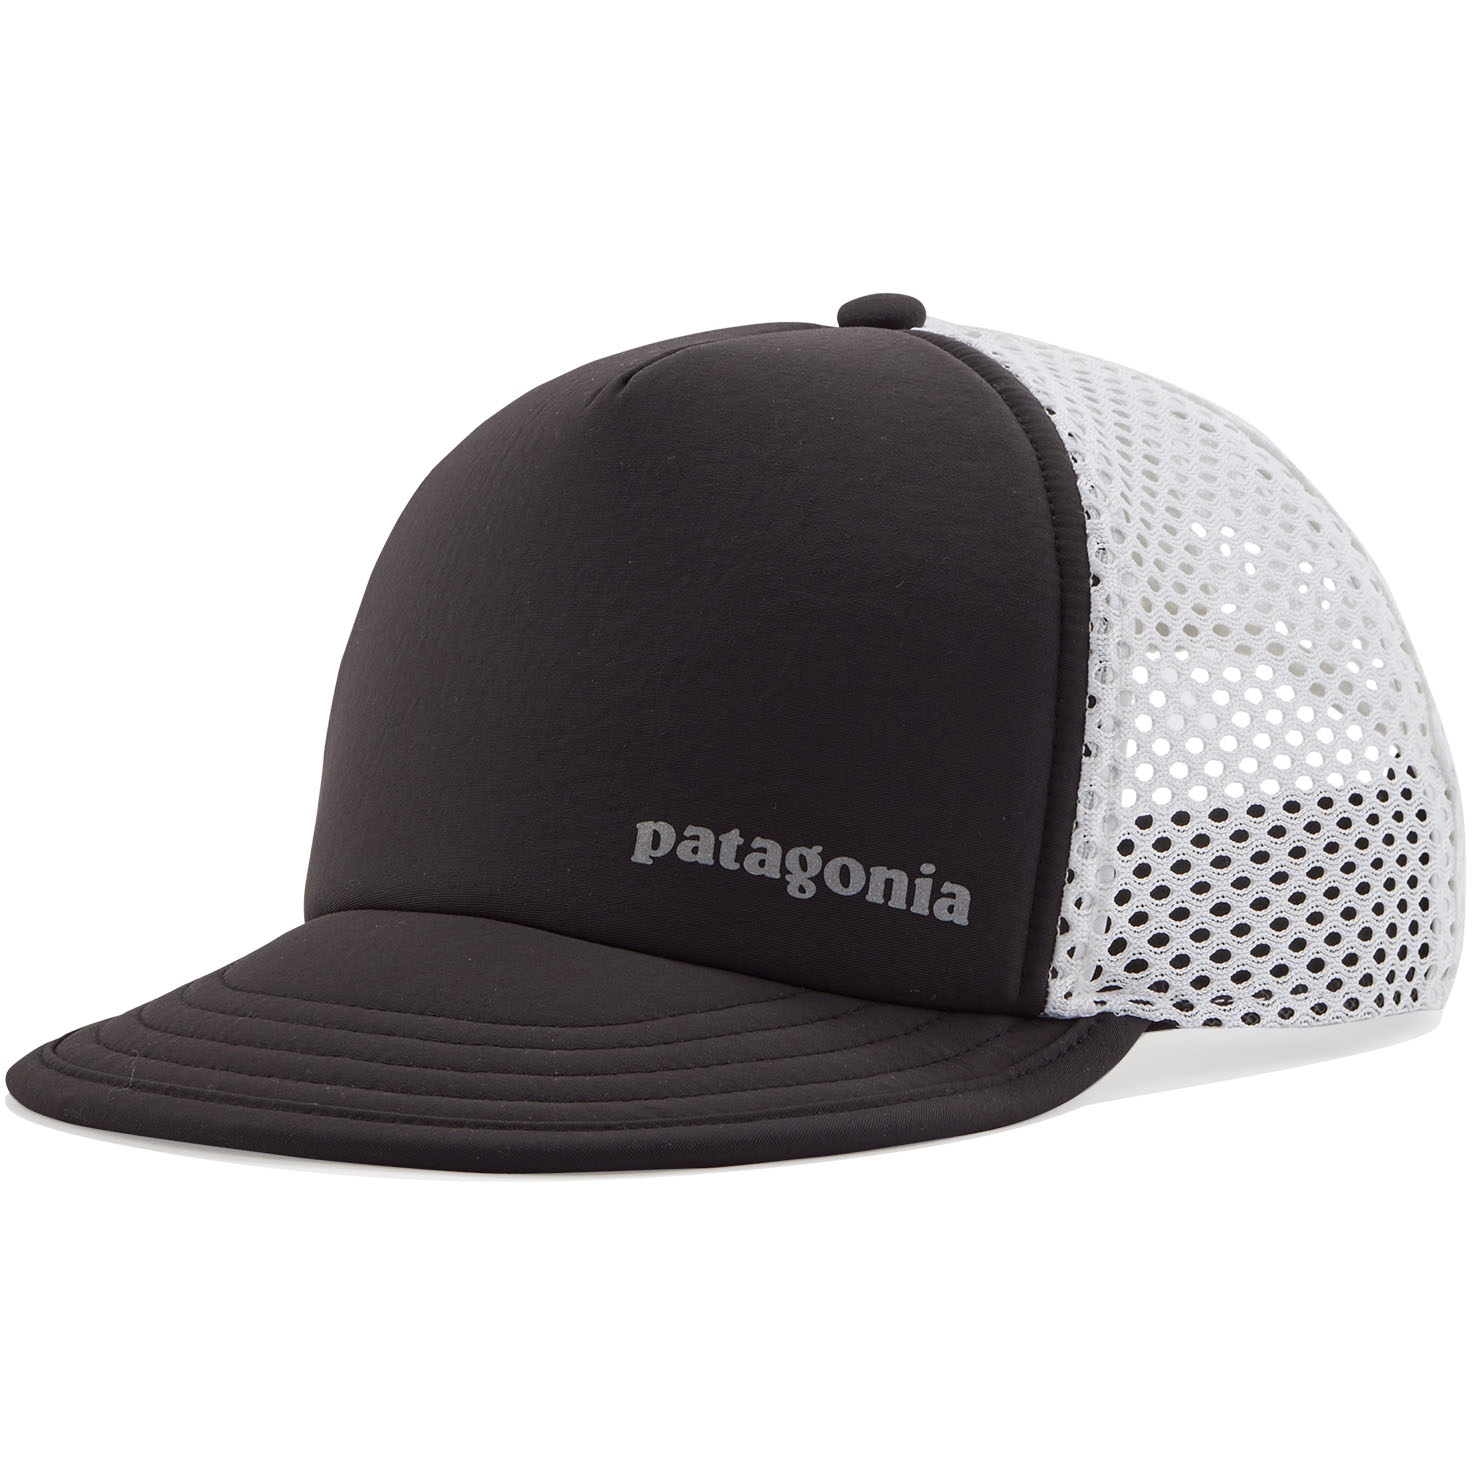 Picture of Patagonia Duckbill Shorty Trucker Hat - Black